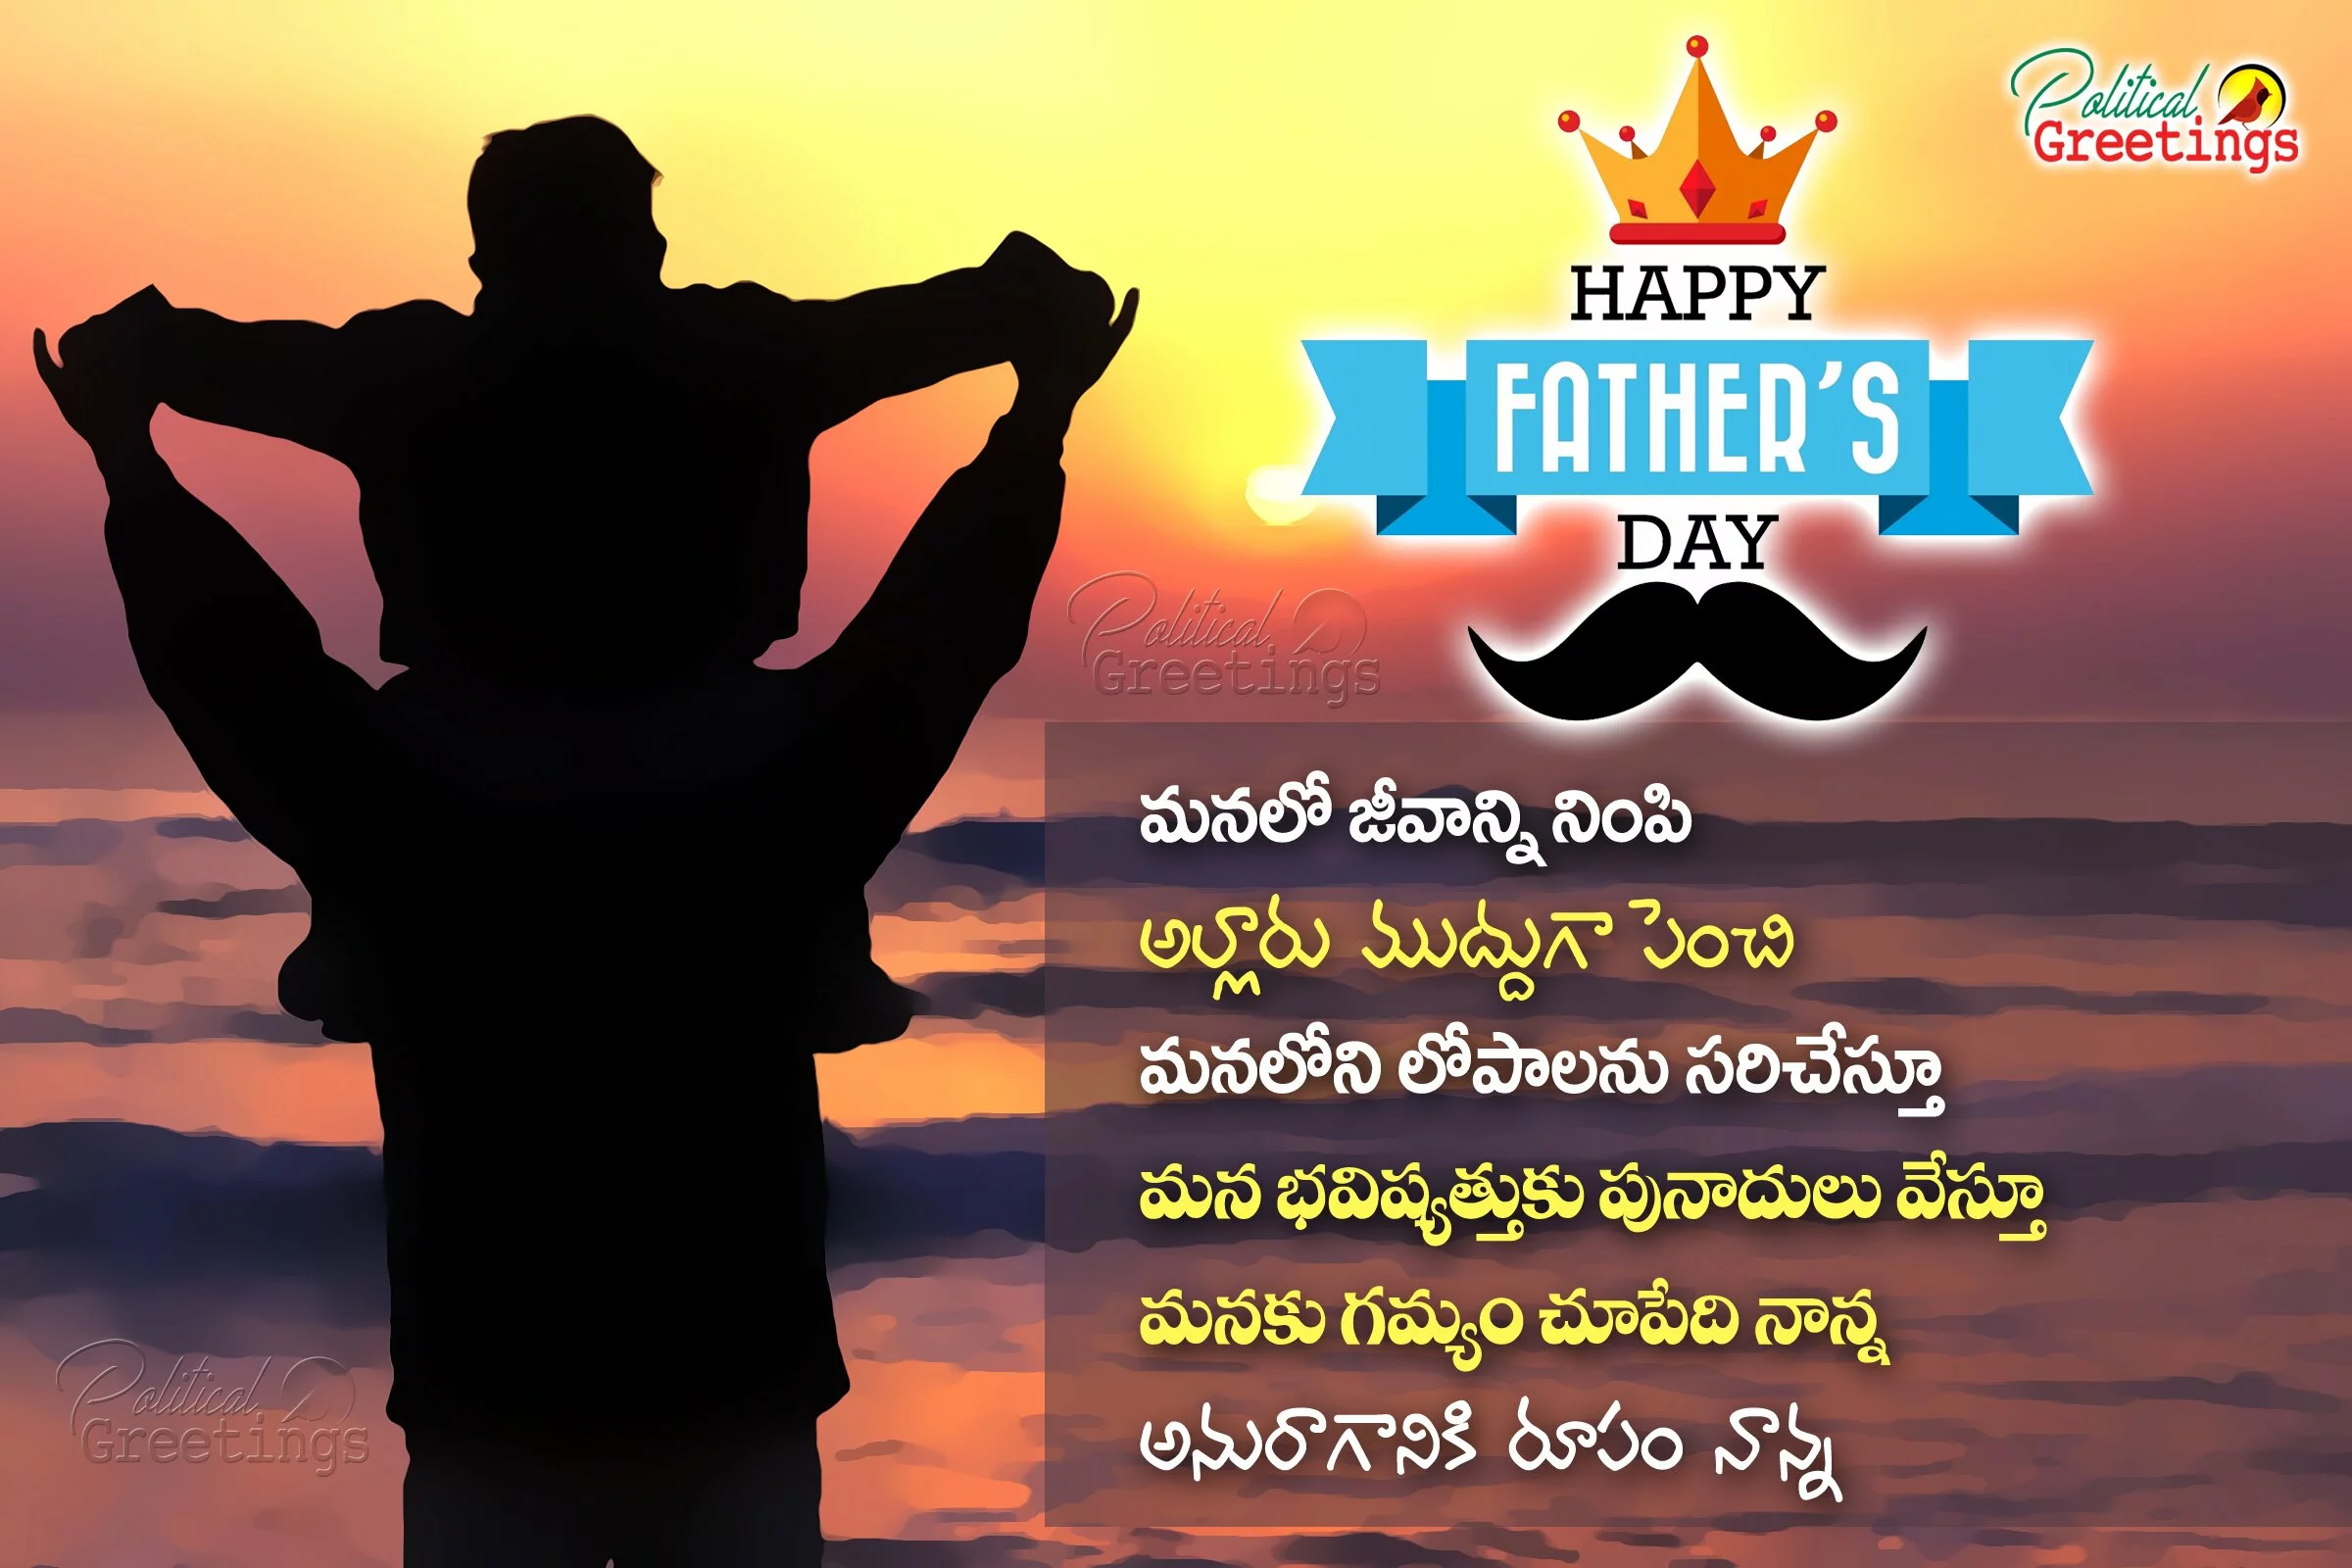 happy-fathers-day-telugu-wishes-quotes-greetings-sms-messages2